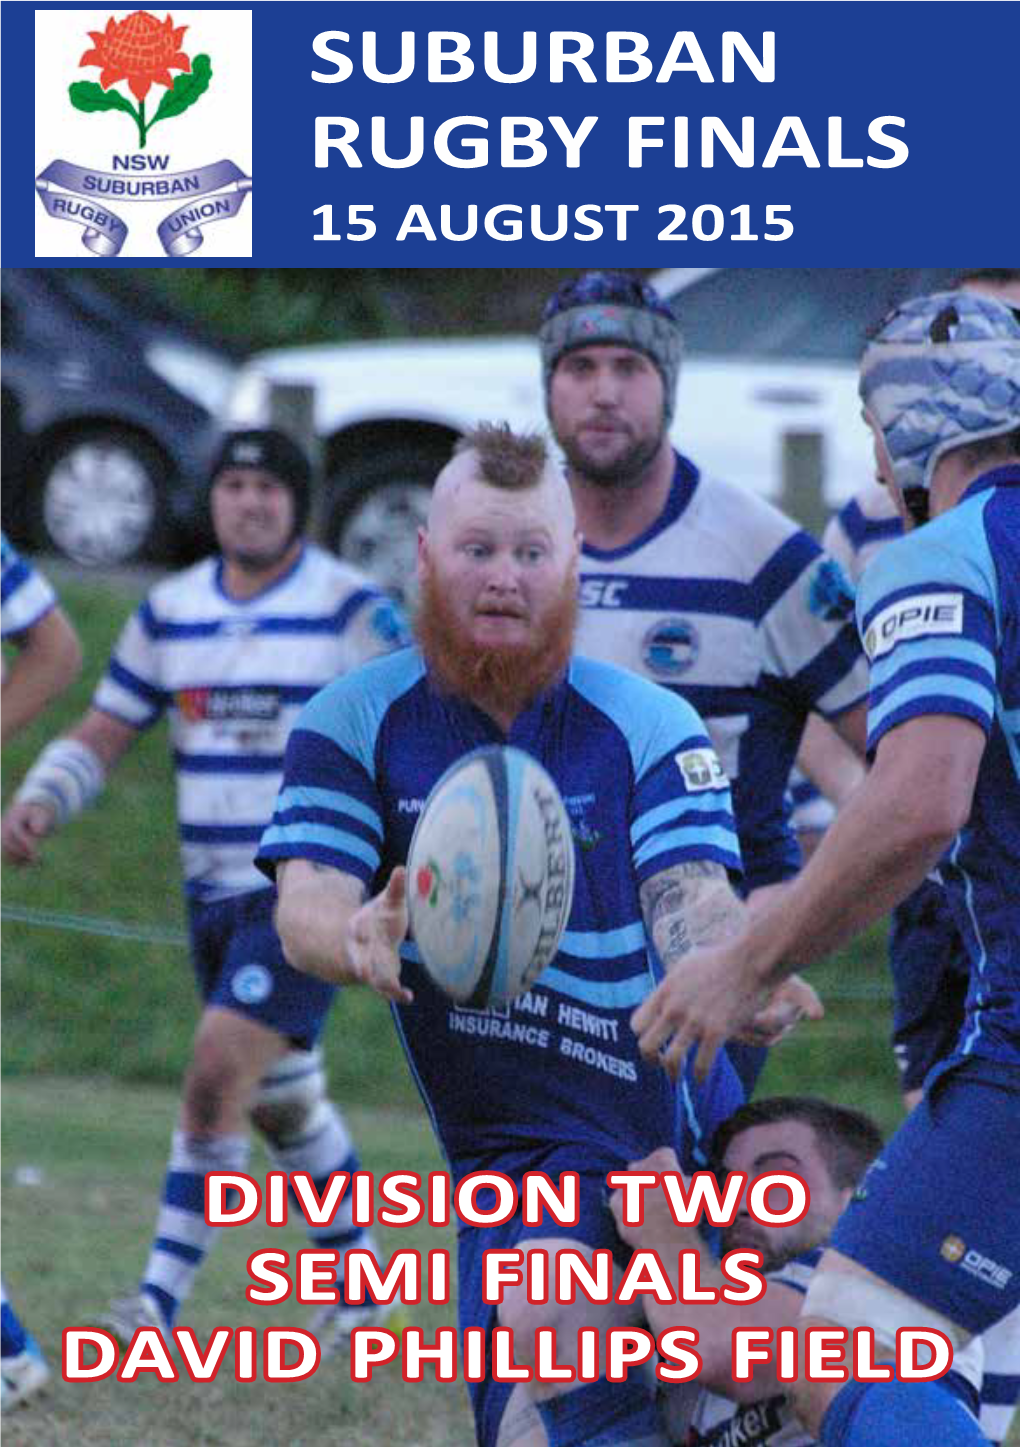 Suburban Rugby Finals 15 August 2015